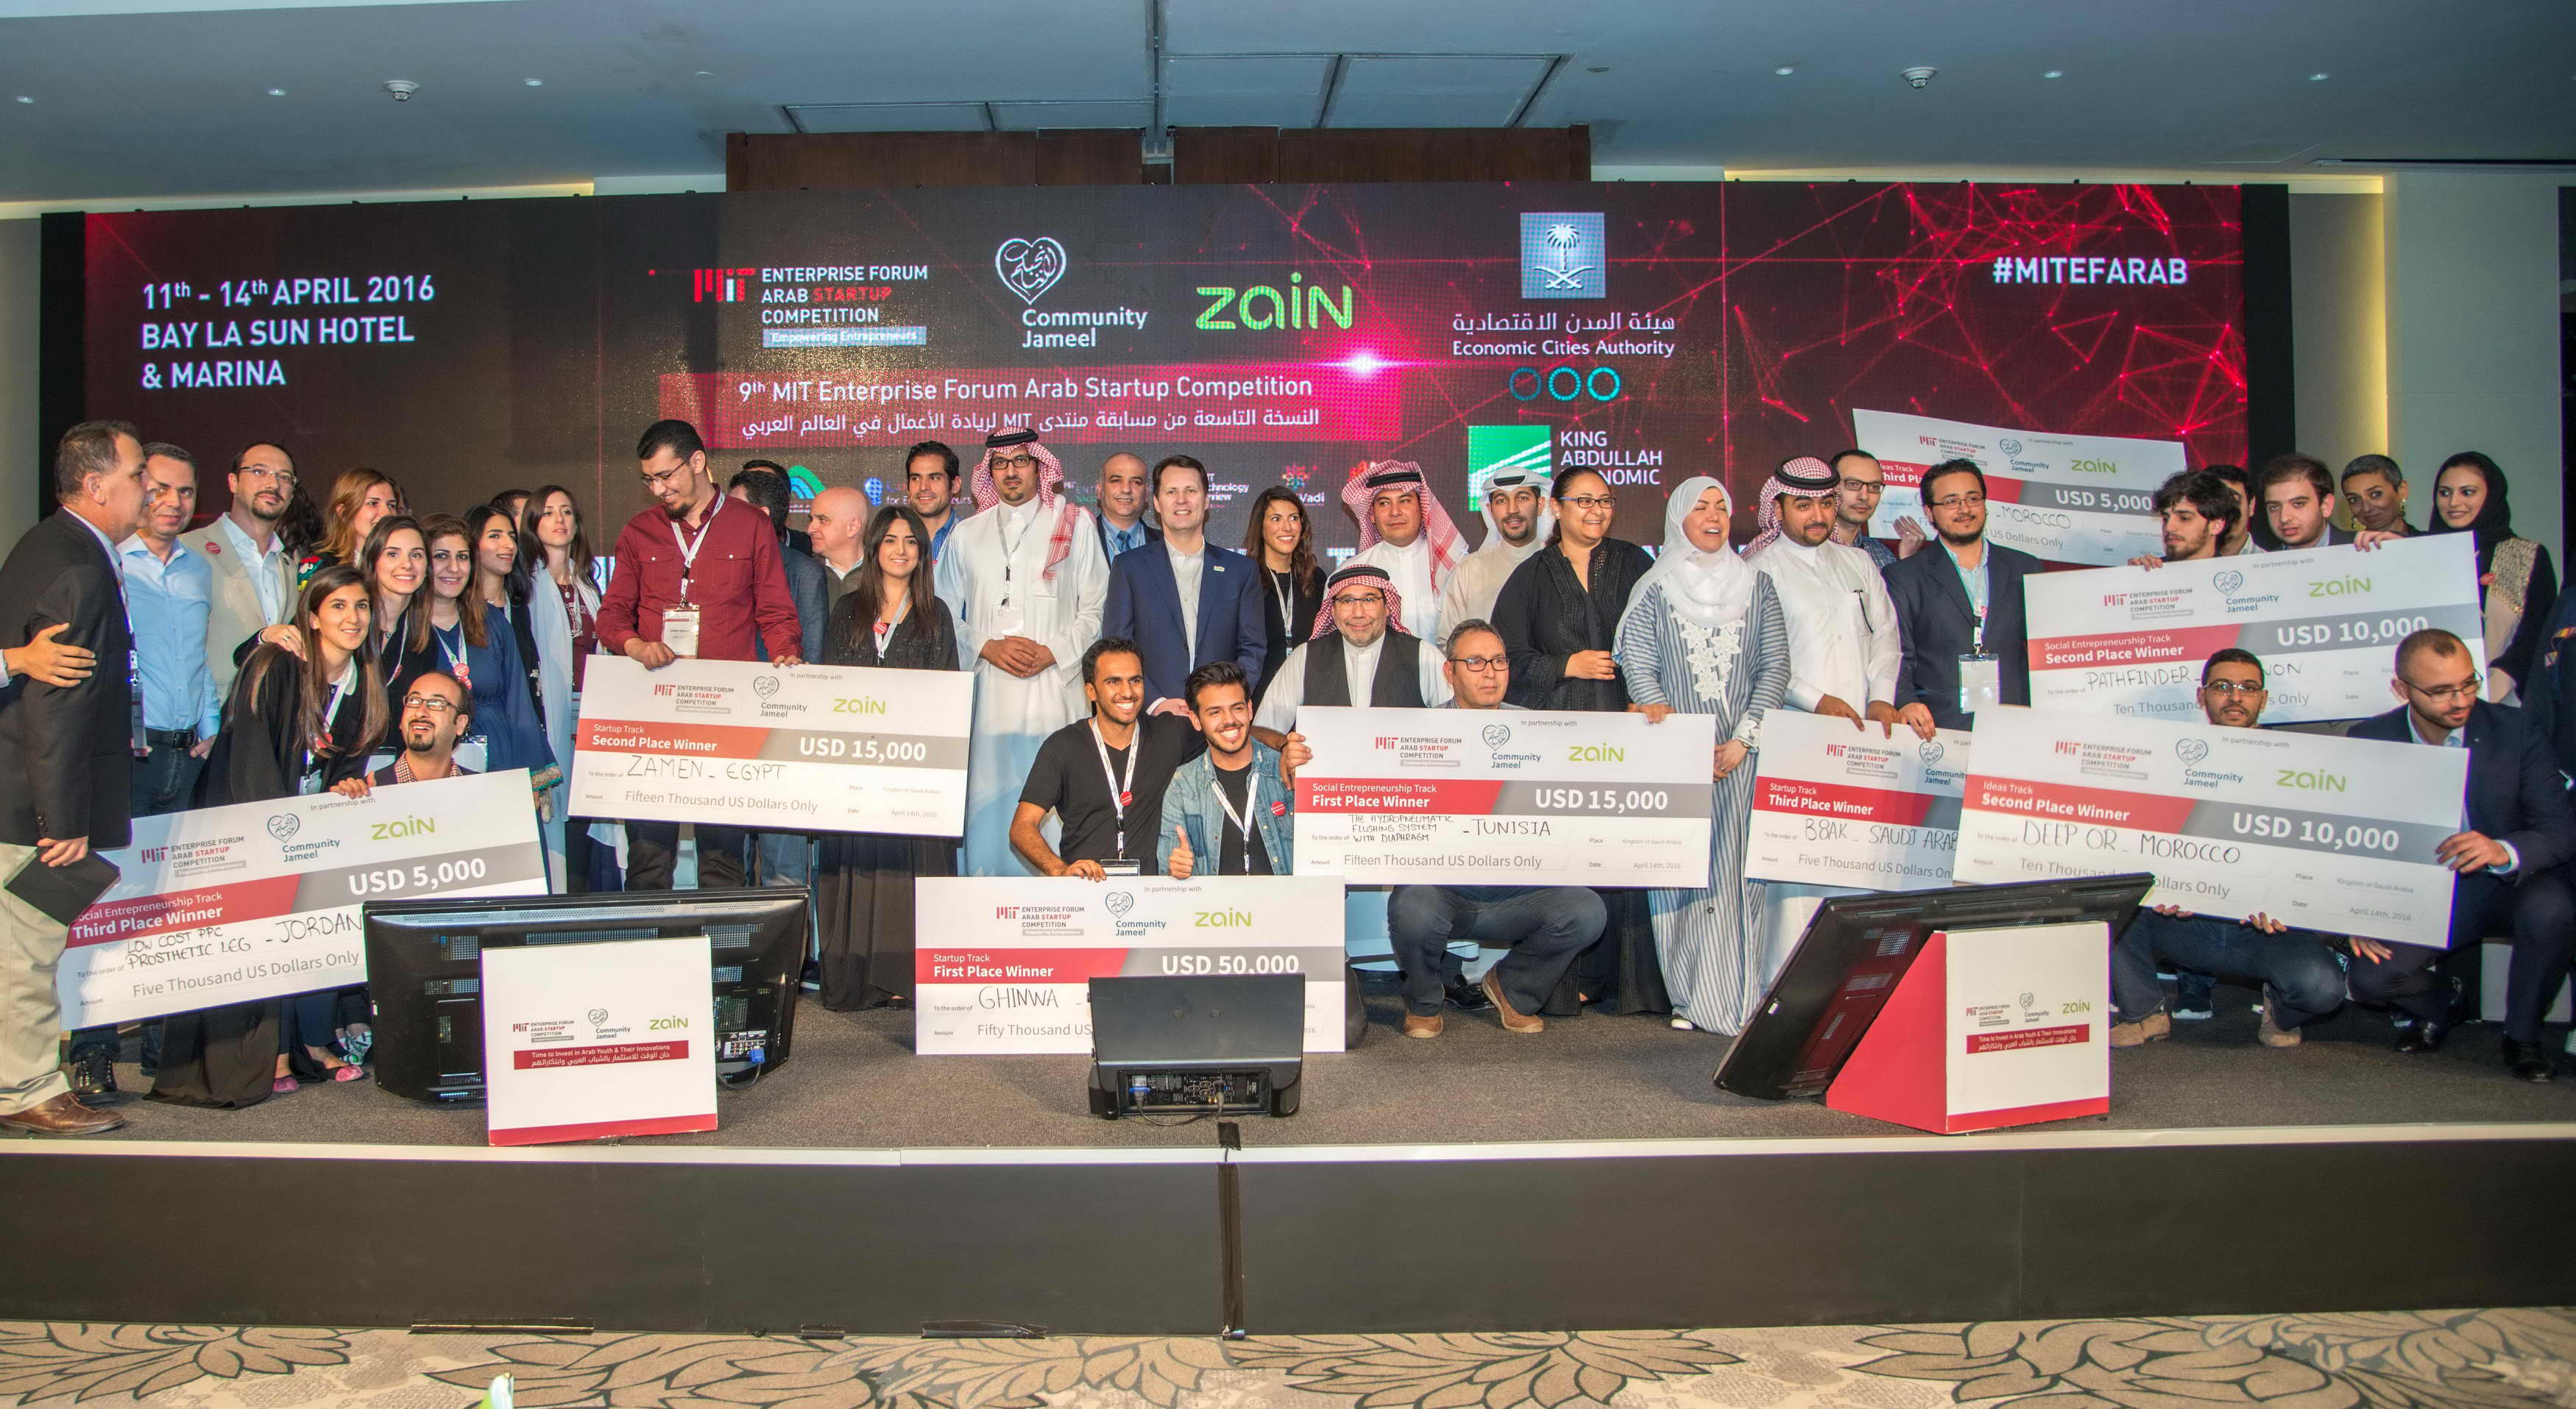 7 Egyptian Startups Reach MIT EF Arab Startup Competition Semifinalists Stage